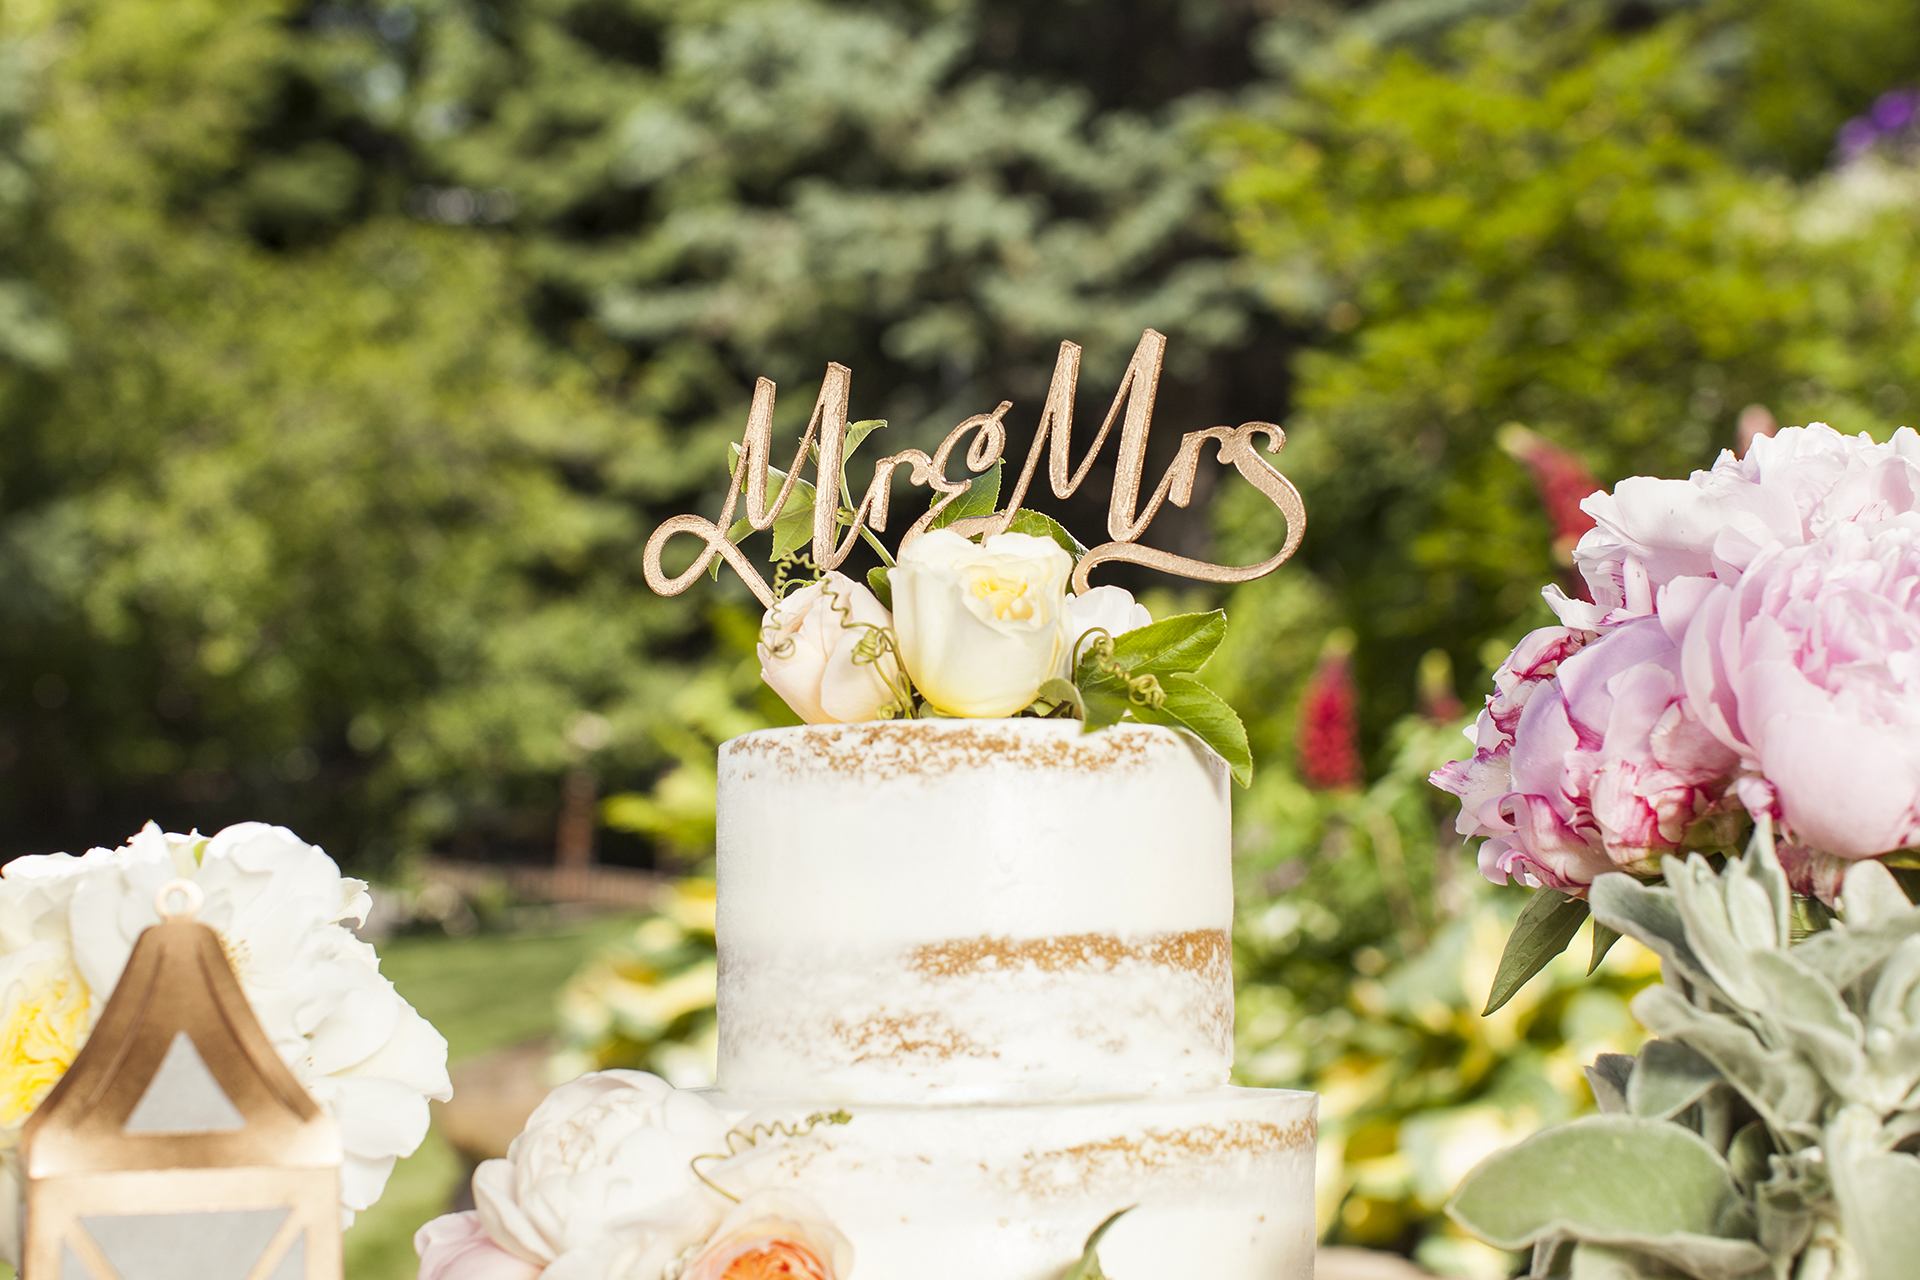 Wooden cake topper that says Mr. and Mrs. on a cake with flowers